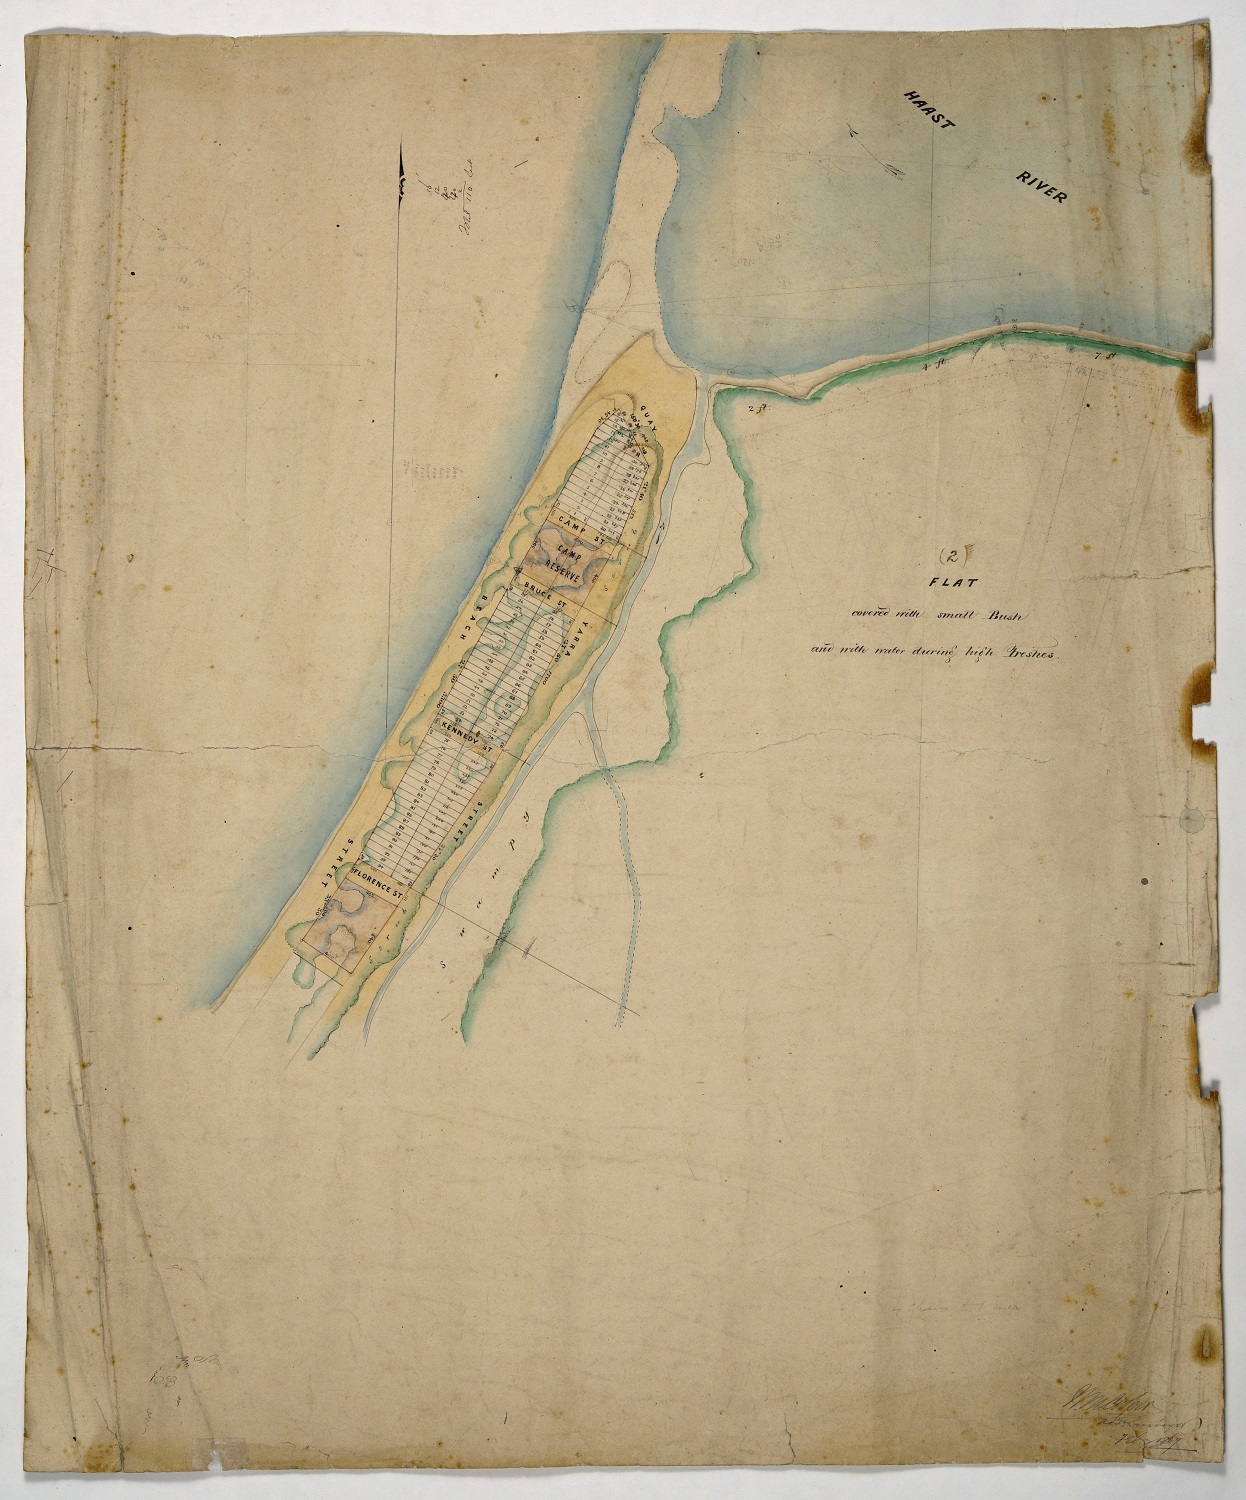 William Cooper’s 1867 survey plan of the township at Haast Beach. Archives New Zealand  R18283311